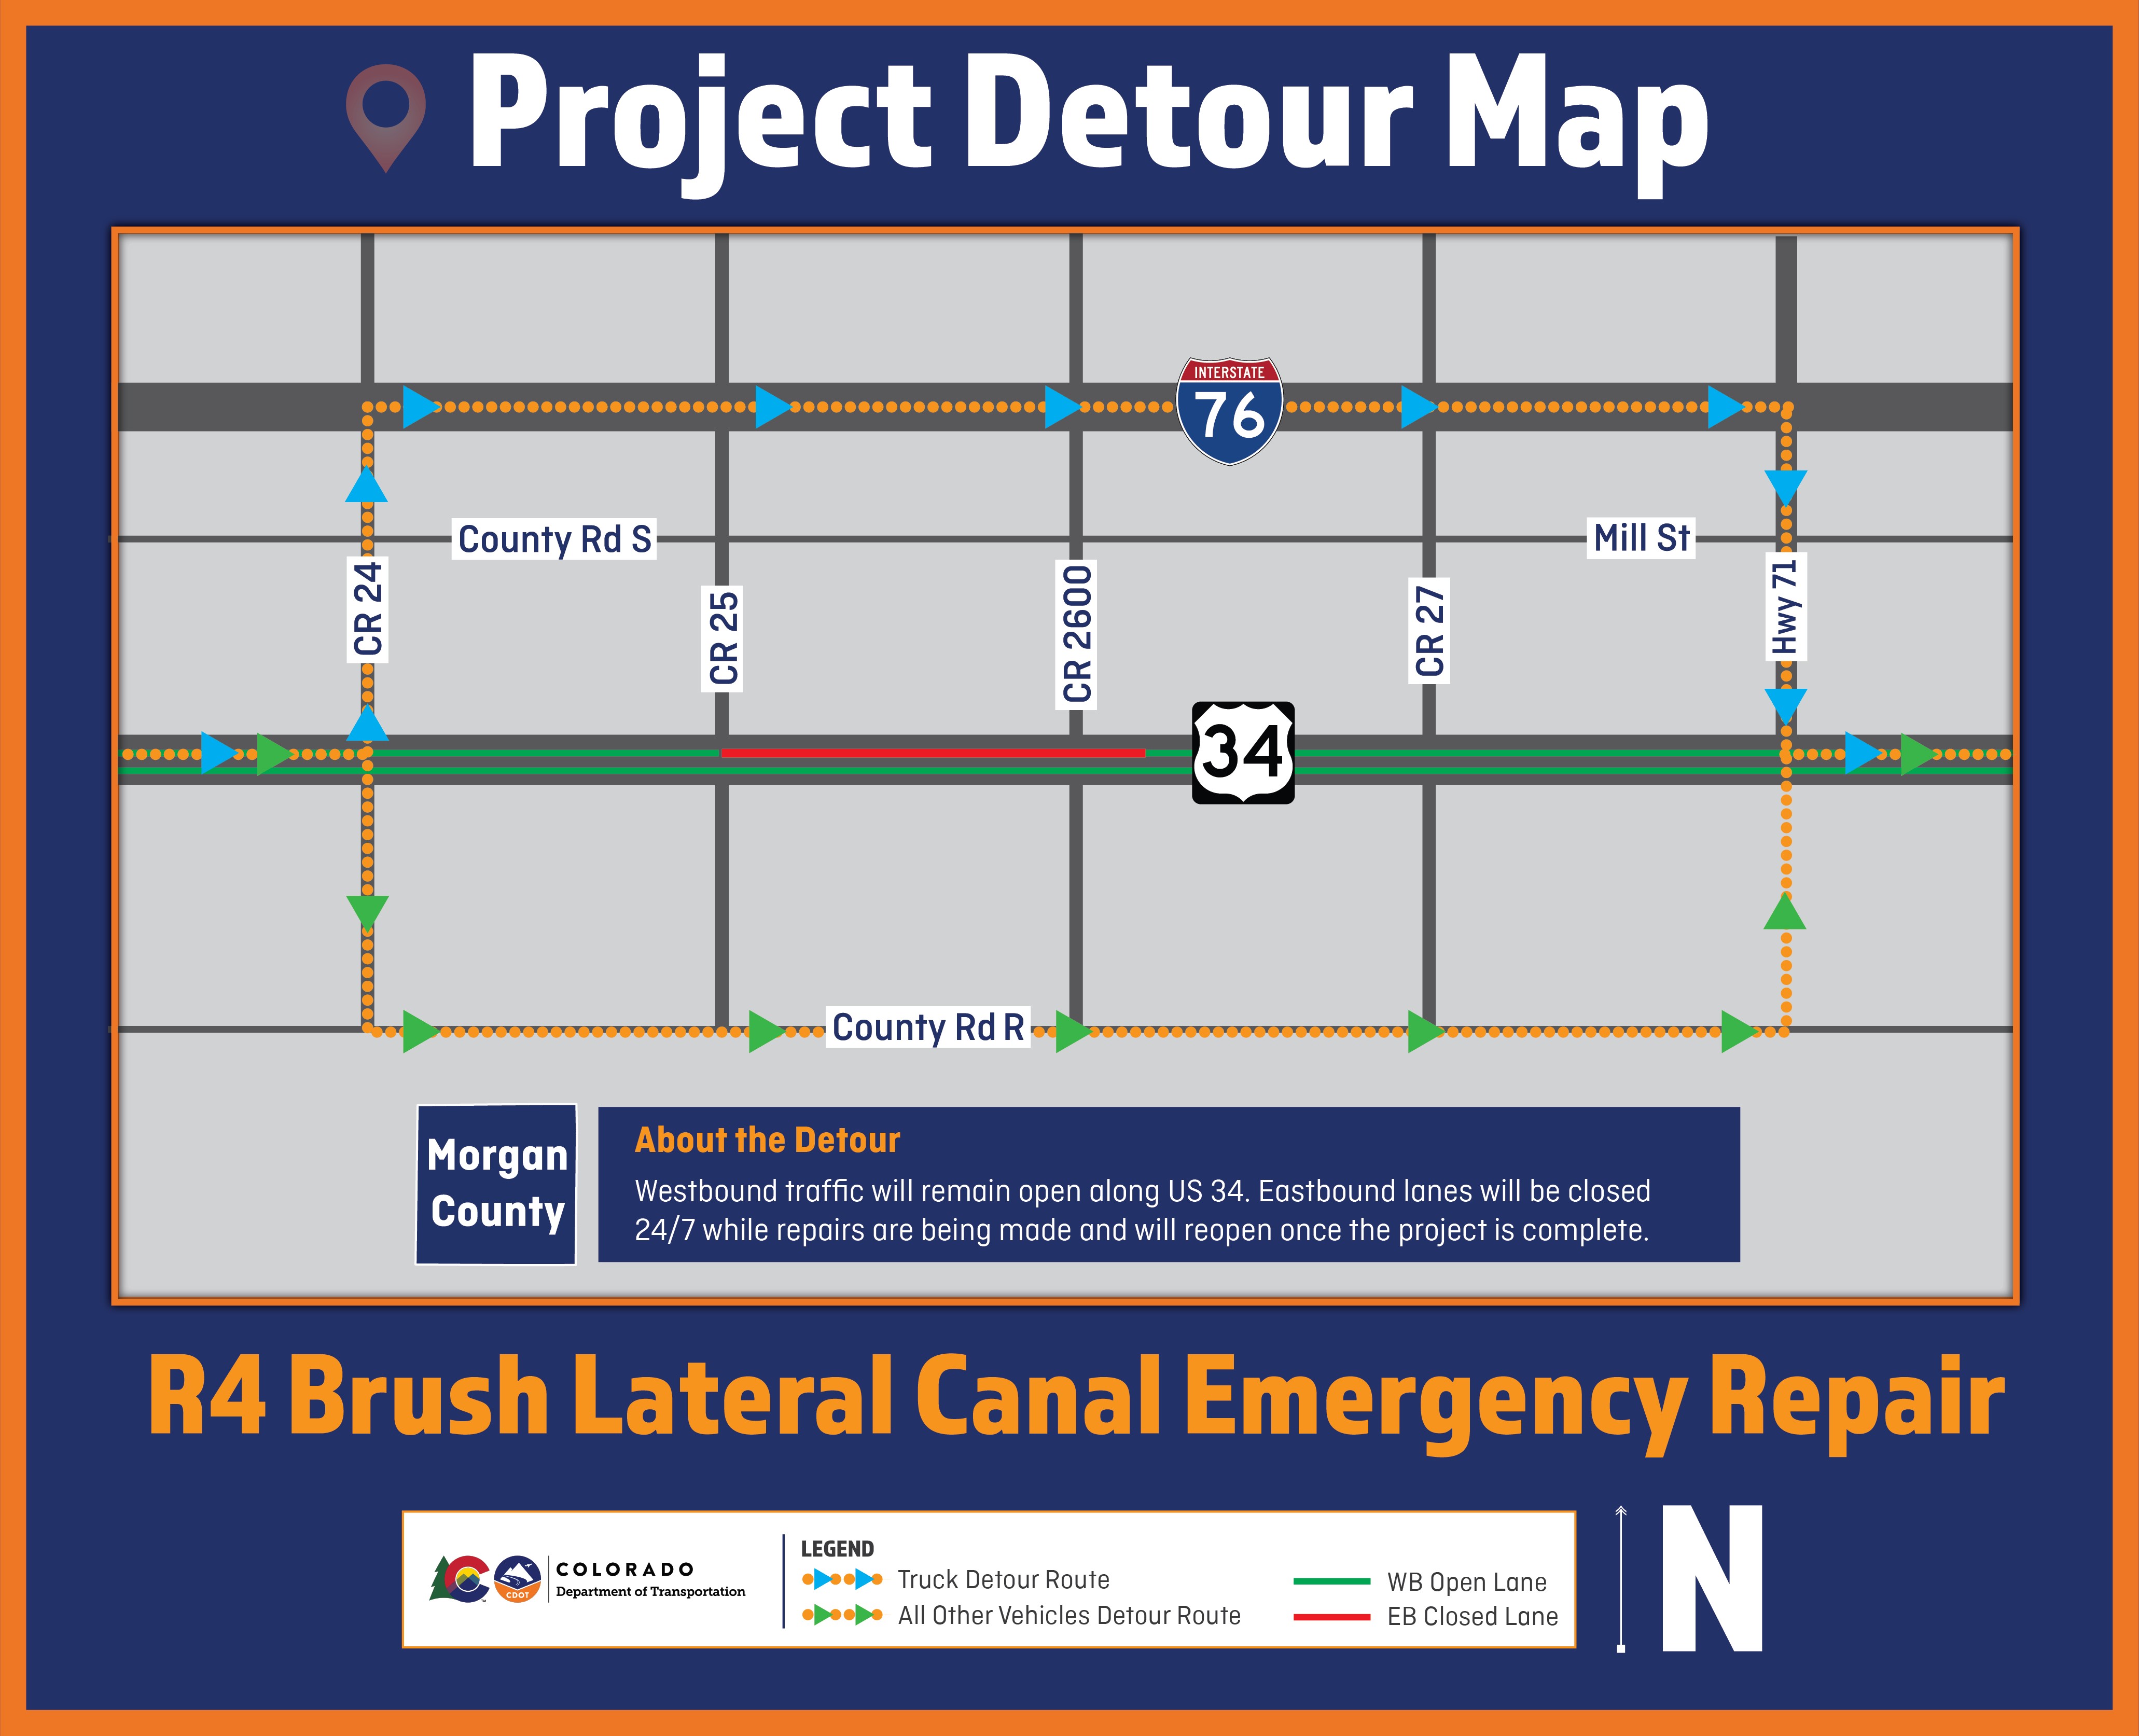 R4 Brush Lateral Canal Emergency Repair Detour Map v2 2.8.23-02 detail image